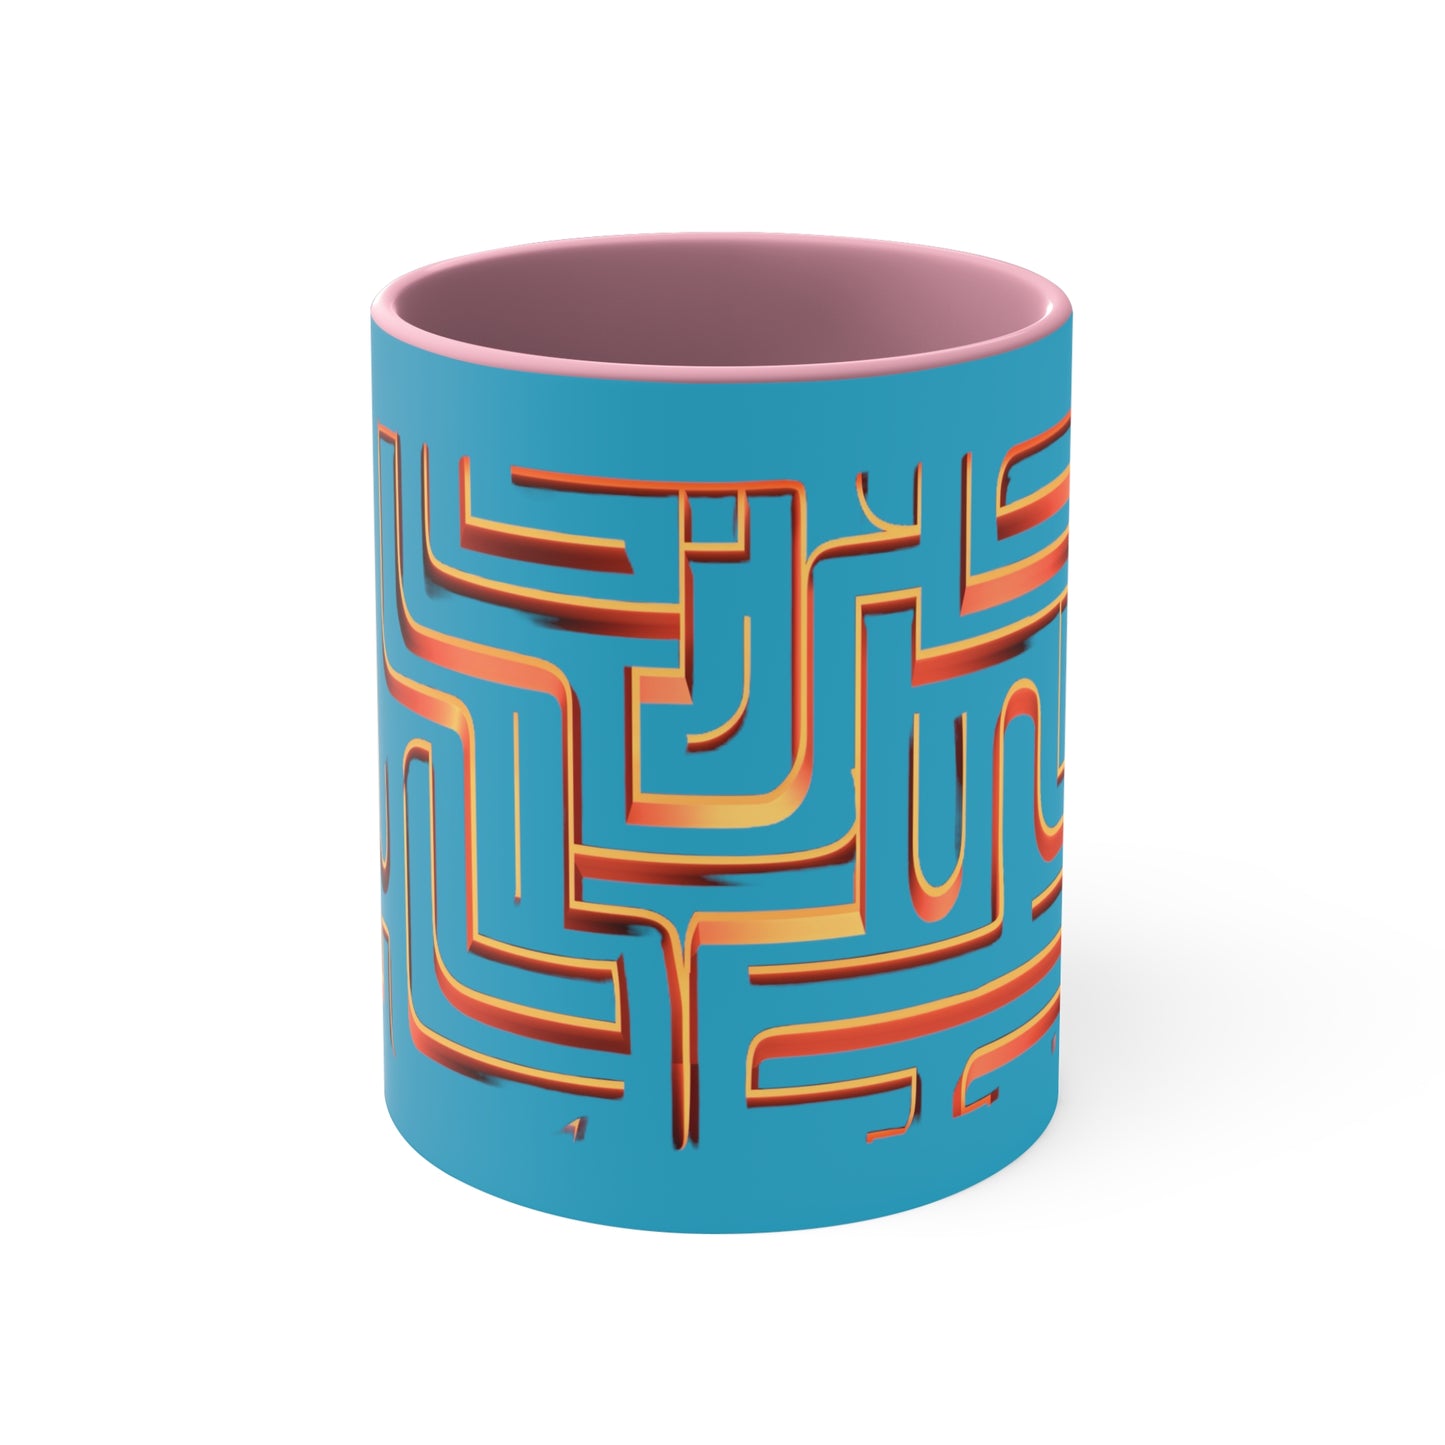 Maze in Turquoise